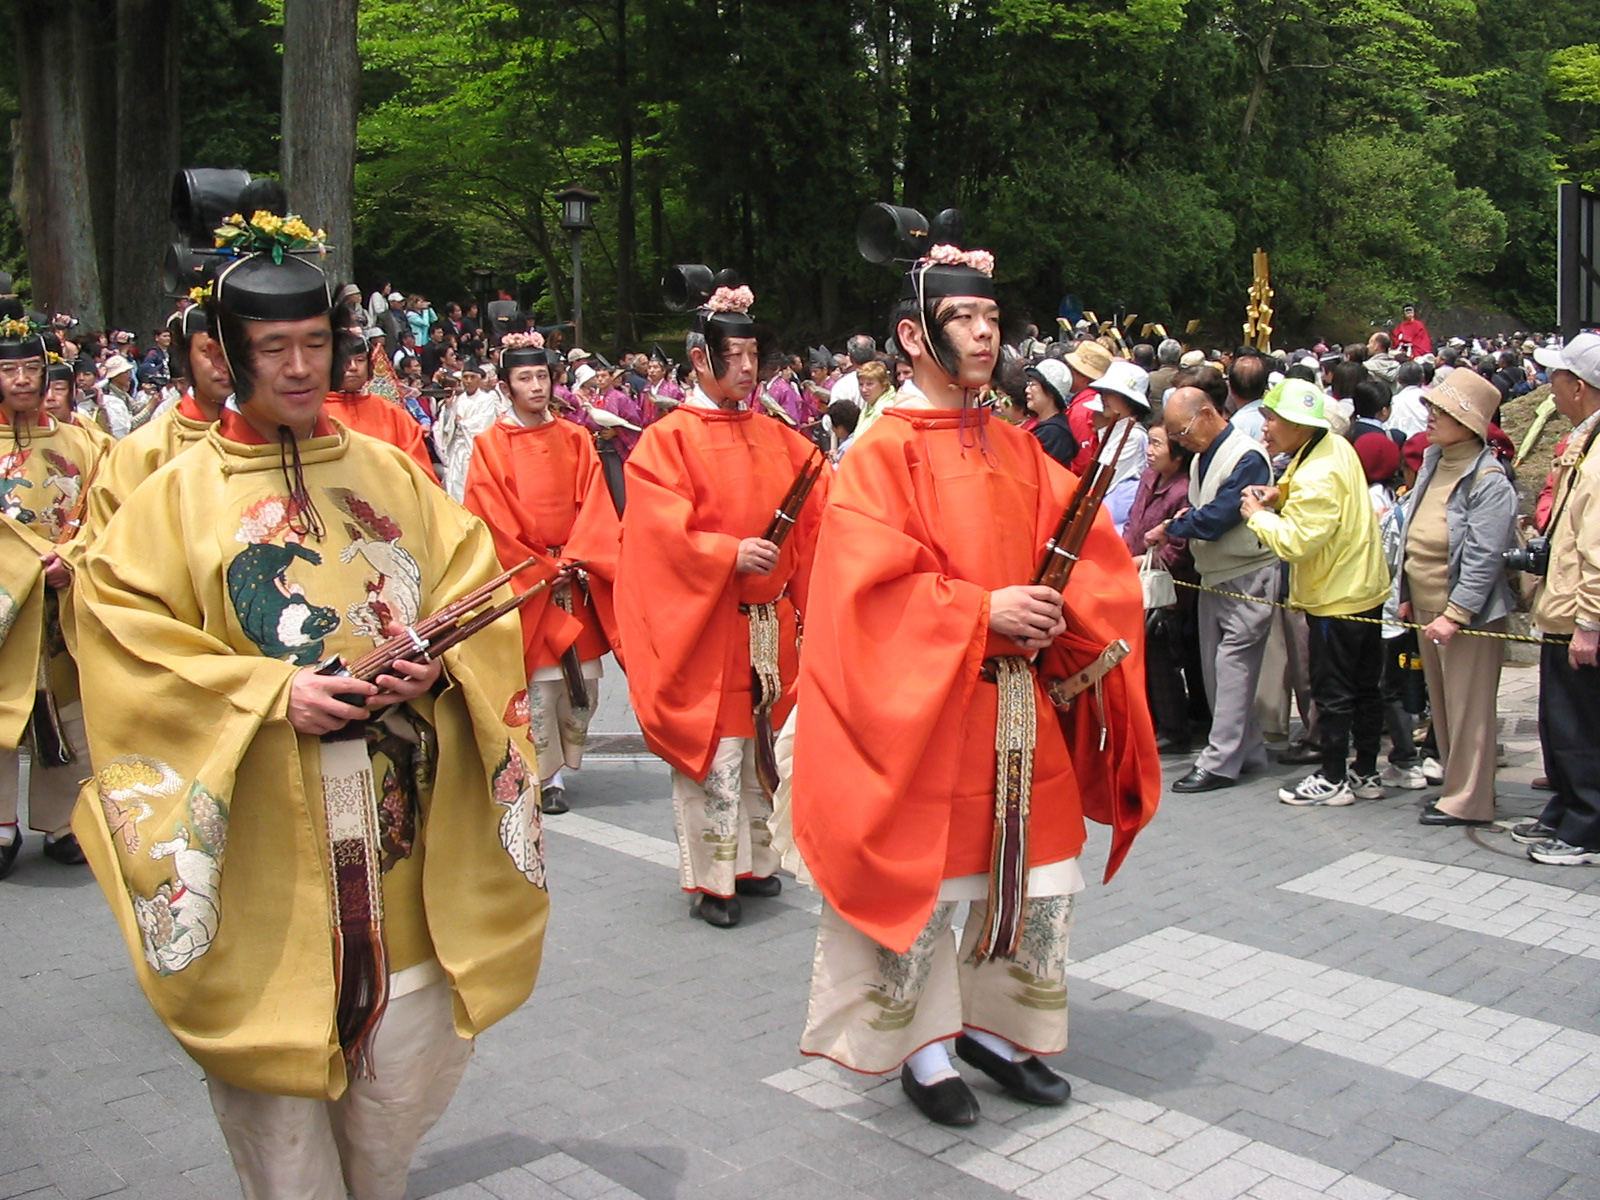 men in tradtional garb and hats with hair on the side